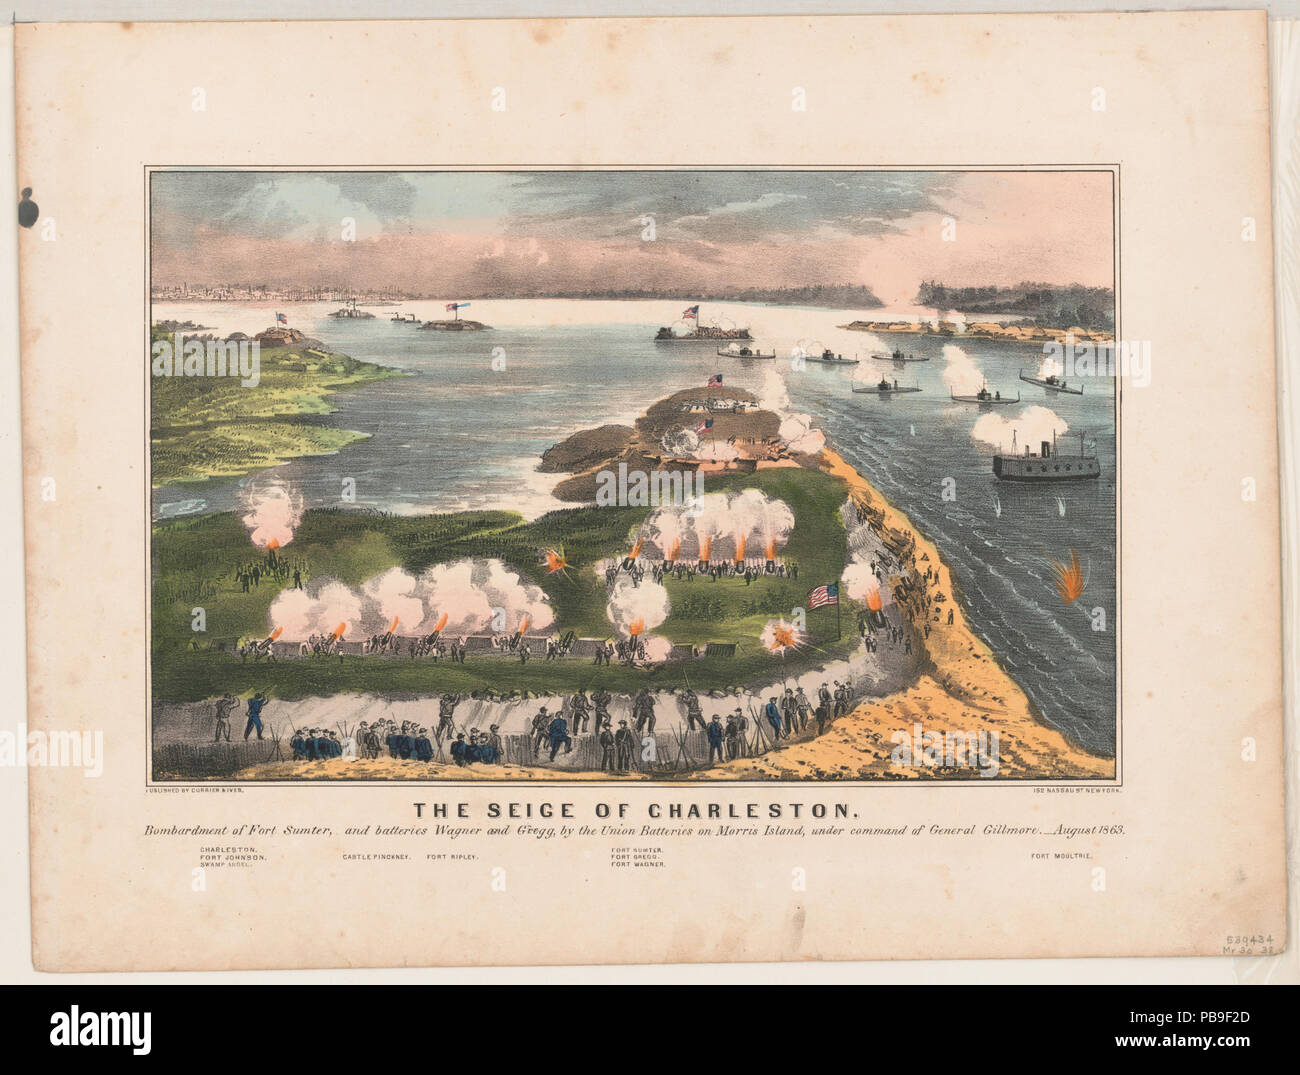 1700 The siege of Charleston- bombardment of Fort Sumter, and batteries Wagner and Gregg, by the Union batteries on Morris Island, under command of General Gilmore, August 1863 LCCN2001705816 Stock Photo